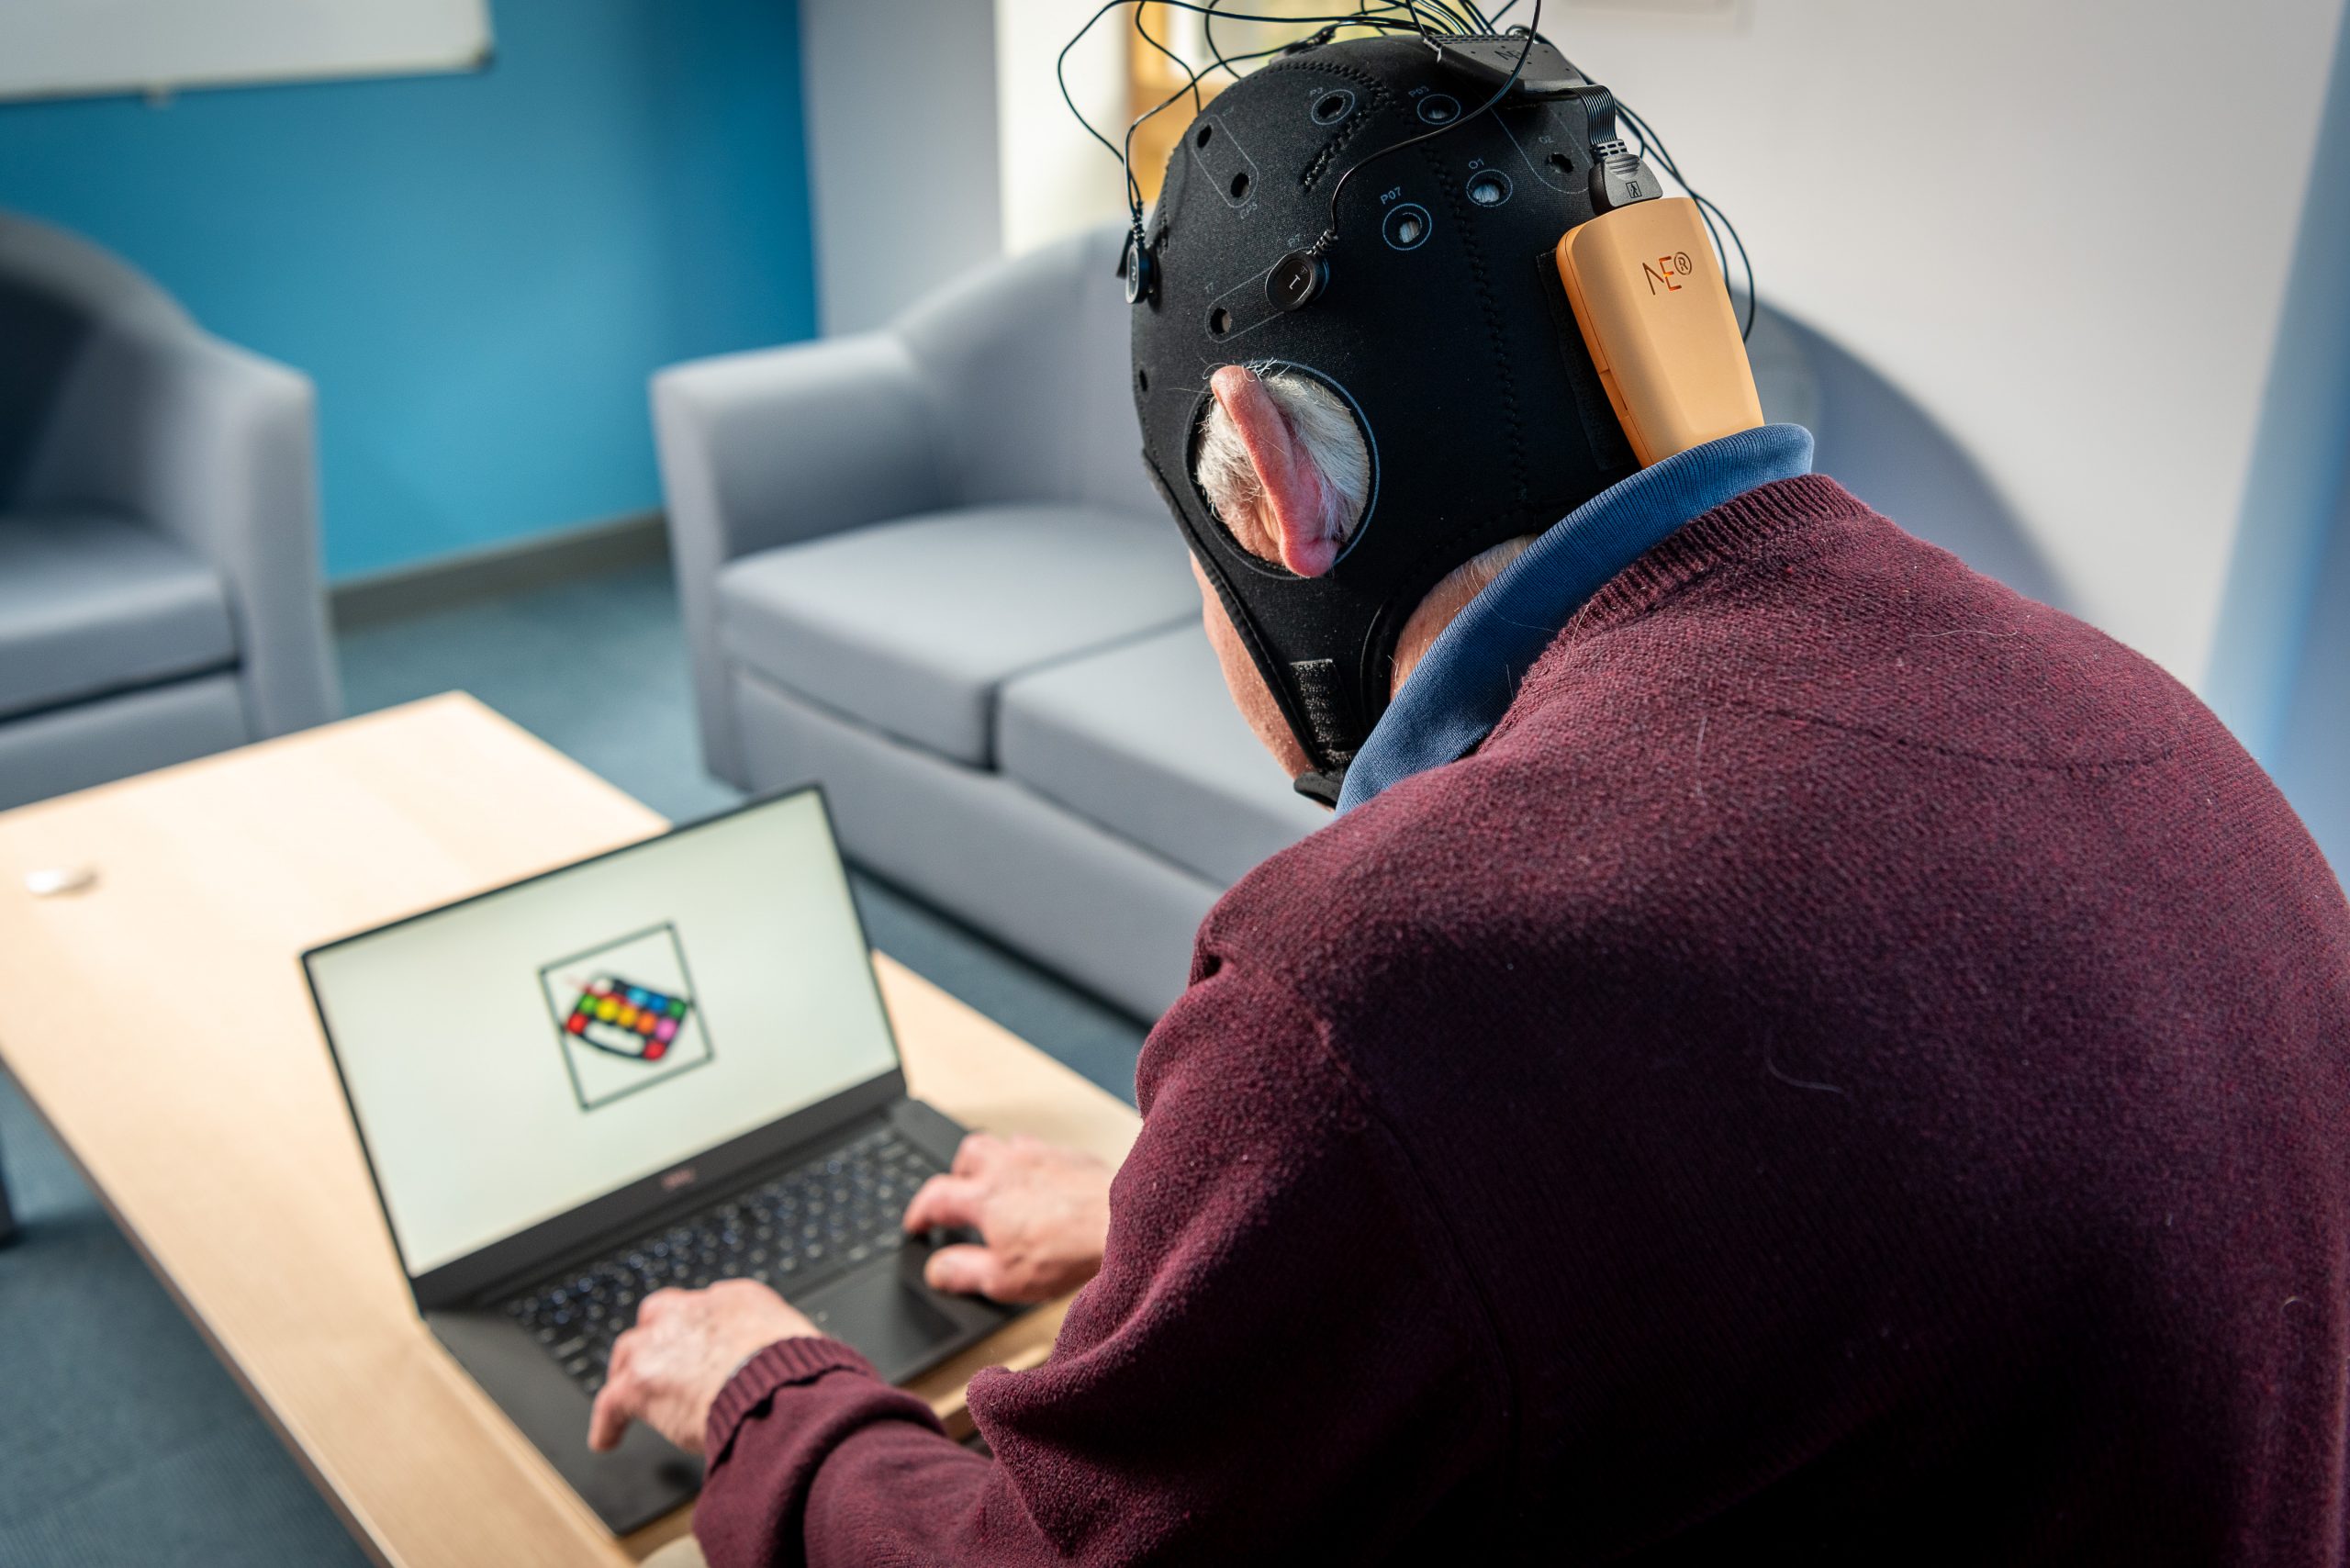 Man with EEG cap on watching a laptop with flashing images.